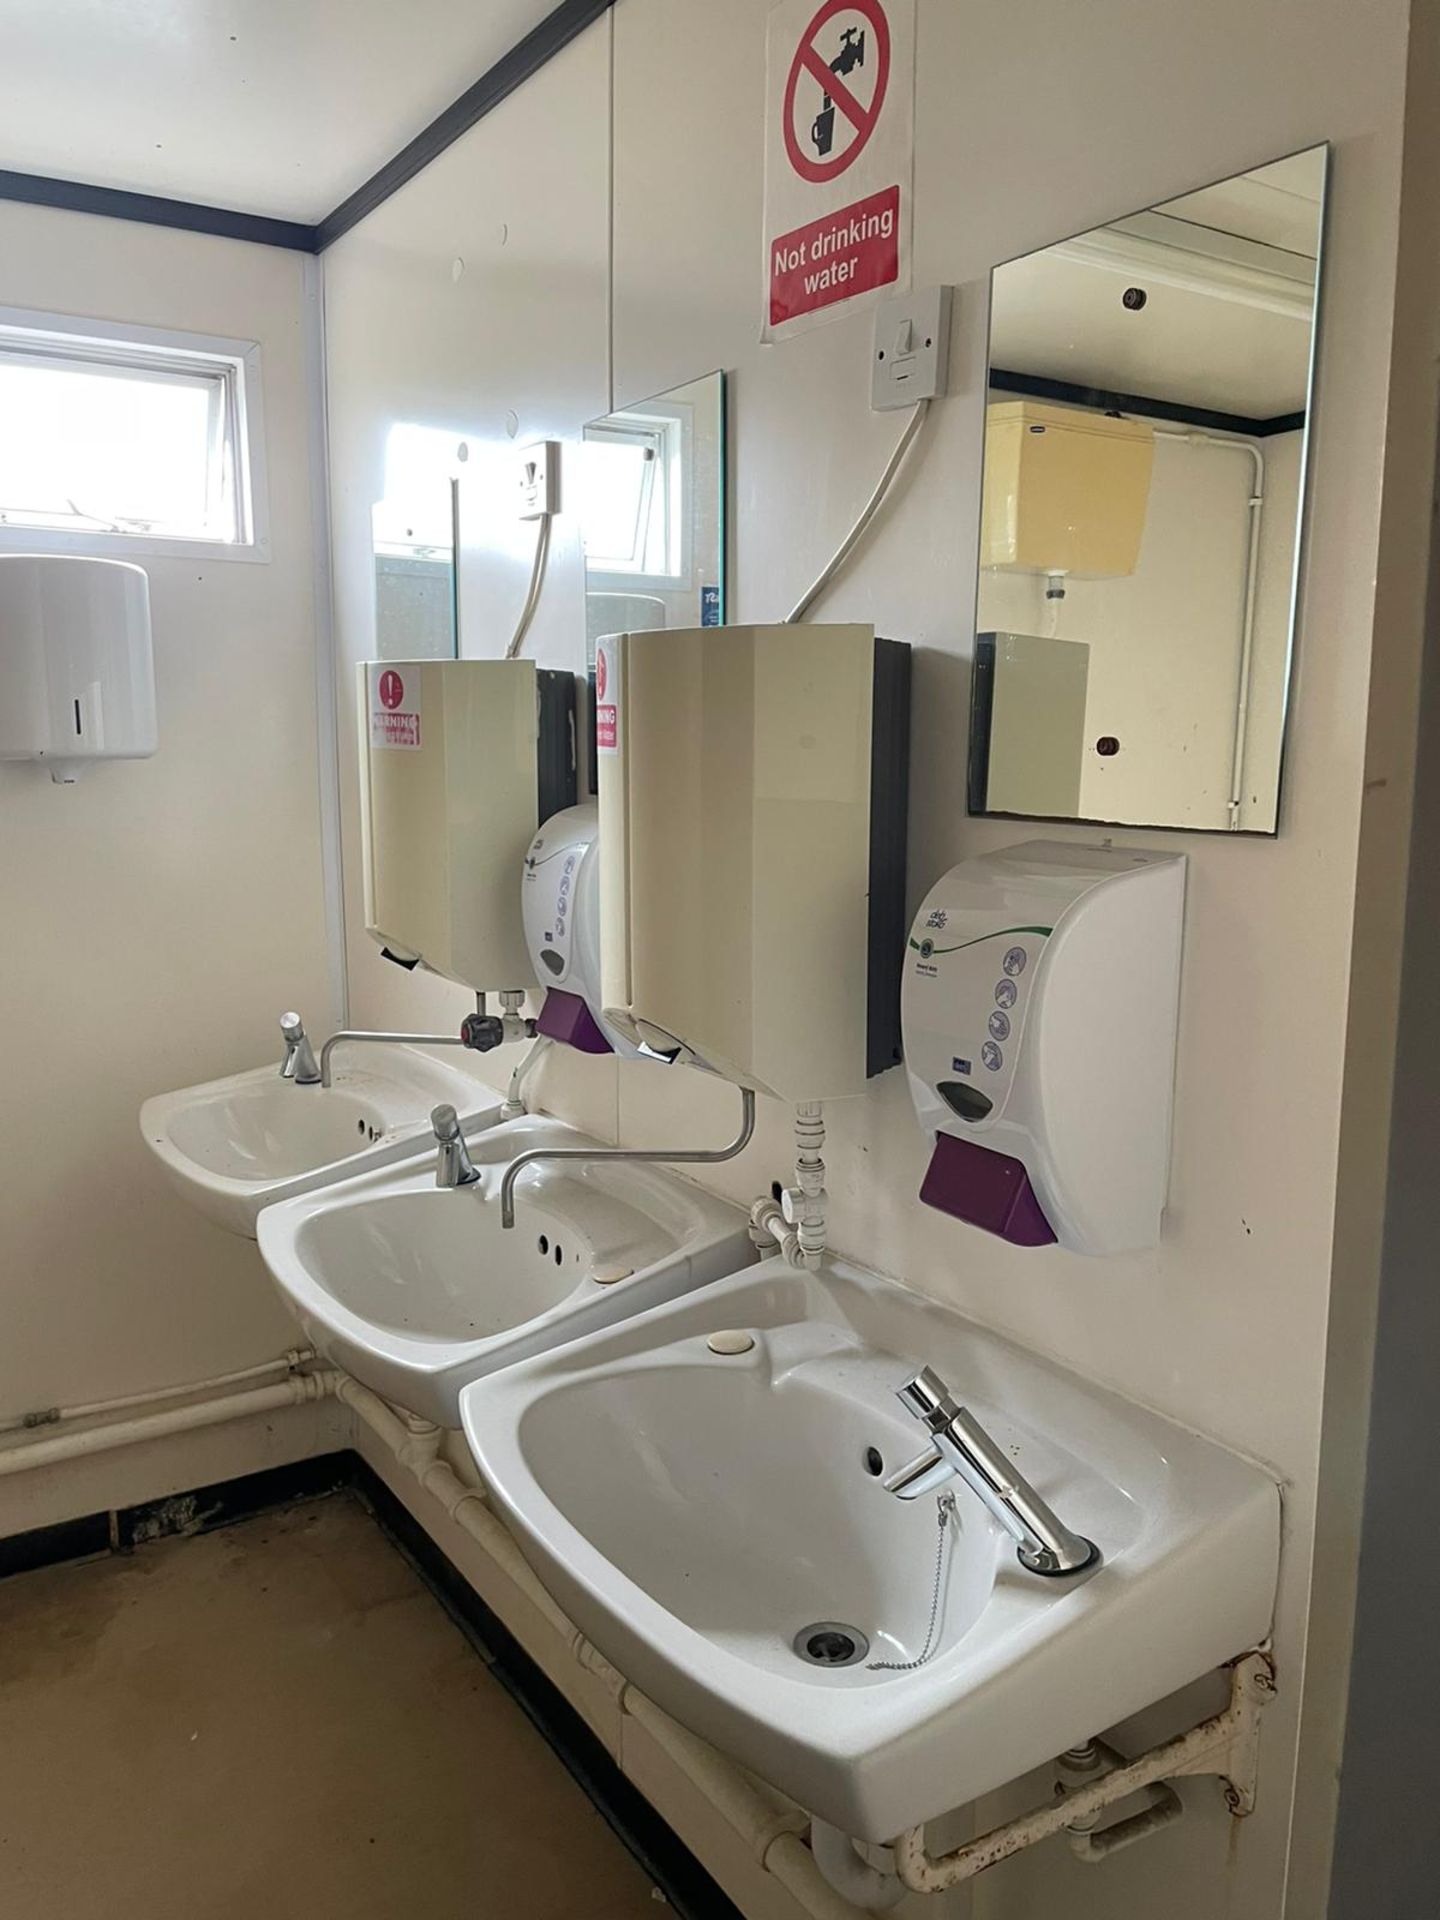 TOILET BLOCK WITH SINKS AND TOILETS IN SIDE, GOOD CONDITION, EX COUNCIL *PLUS VAT* - Image 9 of 9